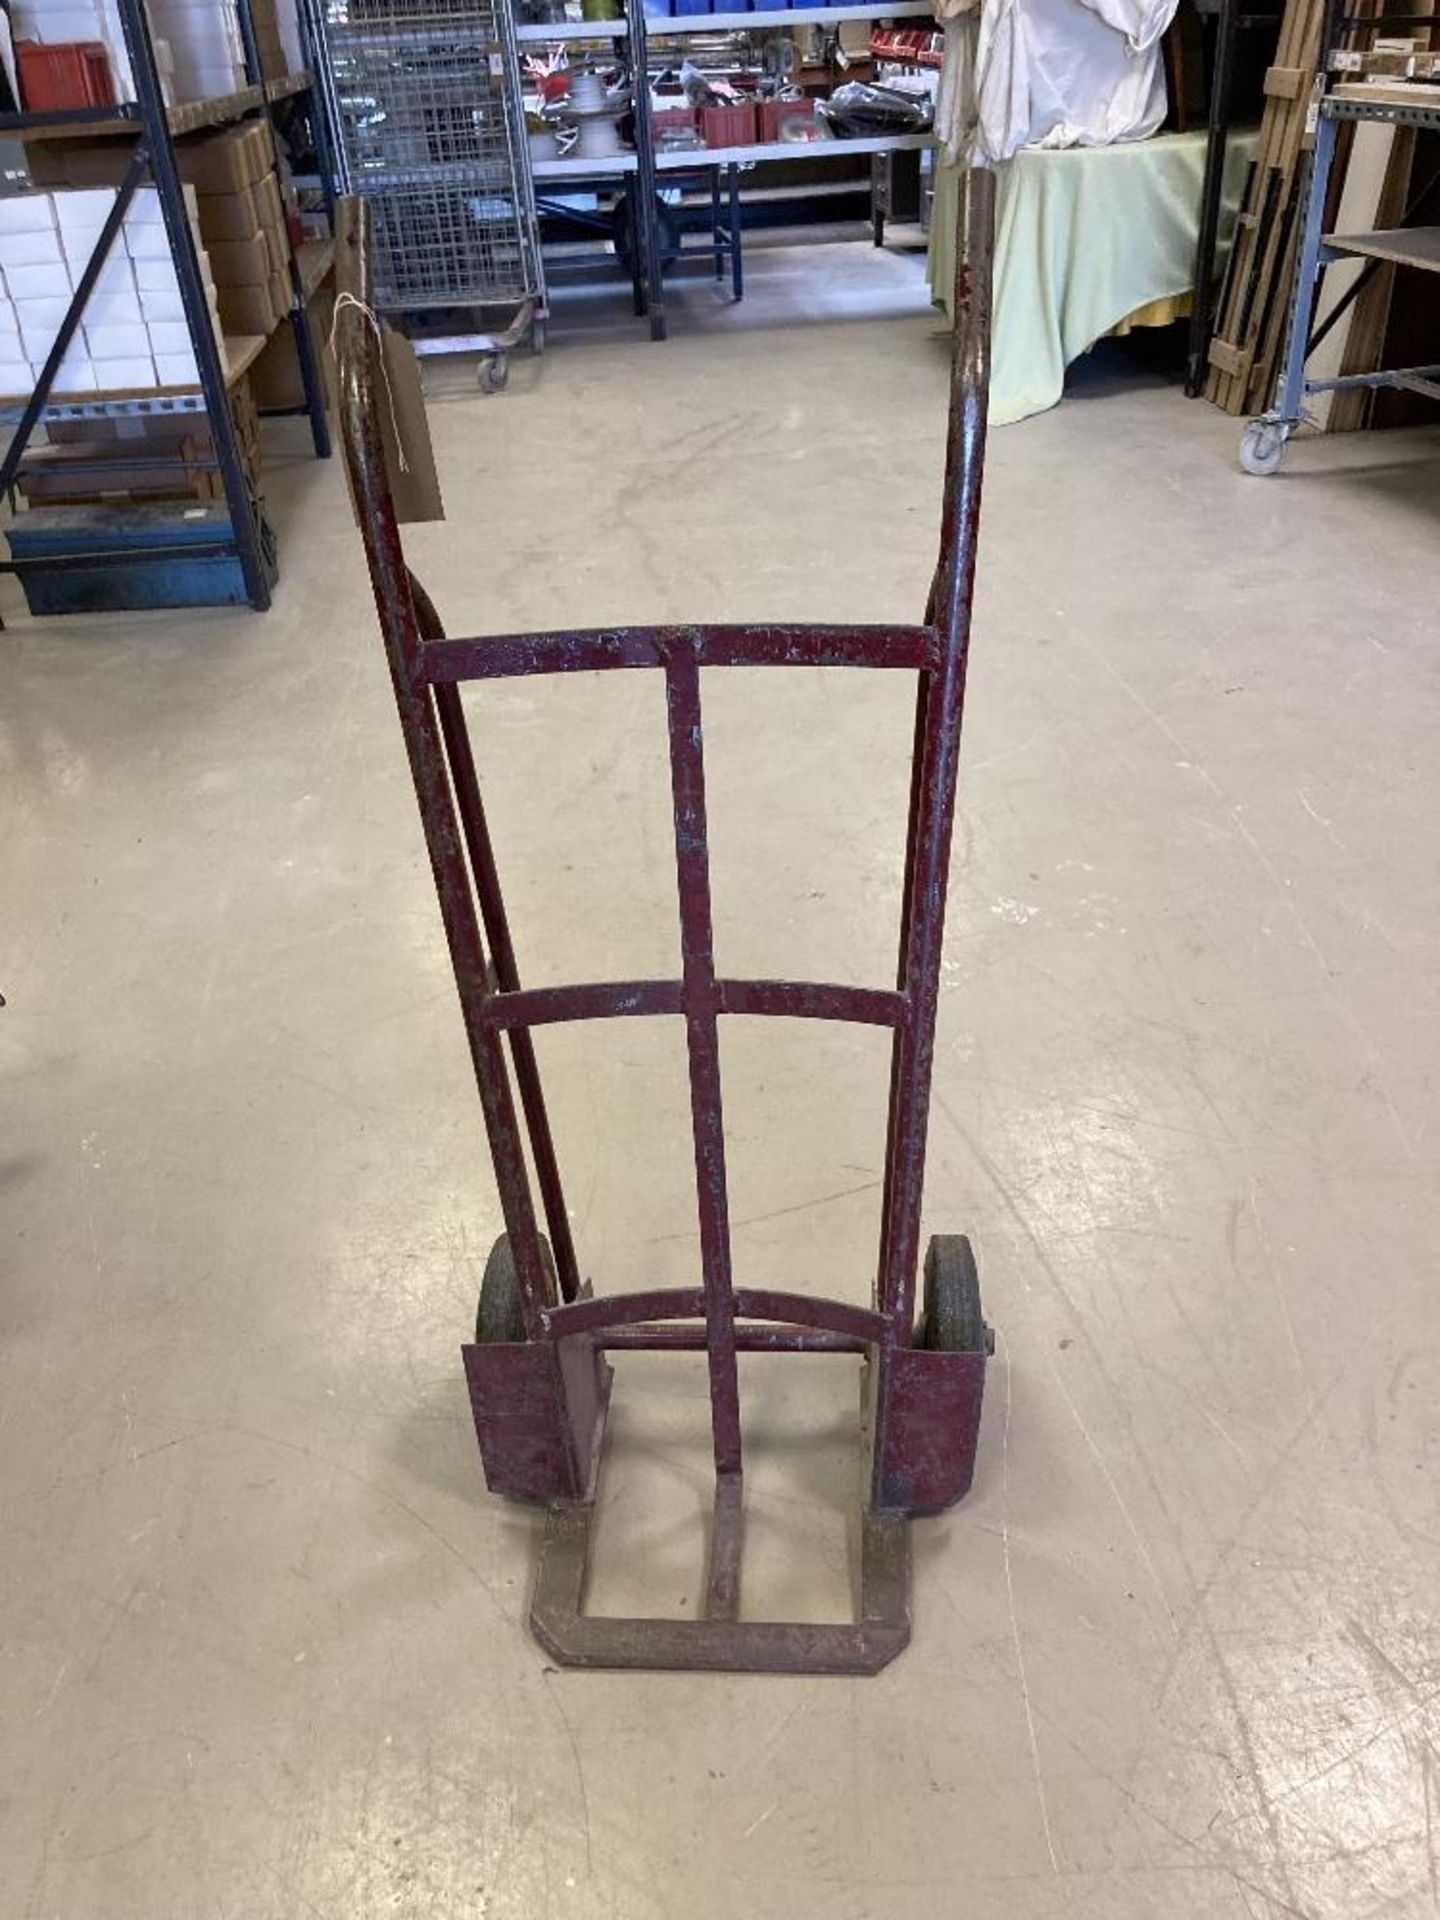 Unbranded Industrial Hand Truck